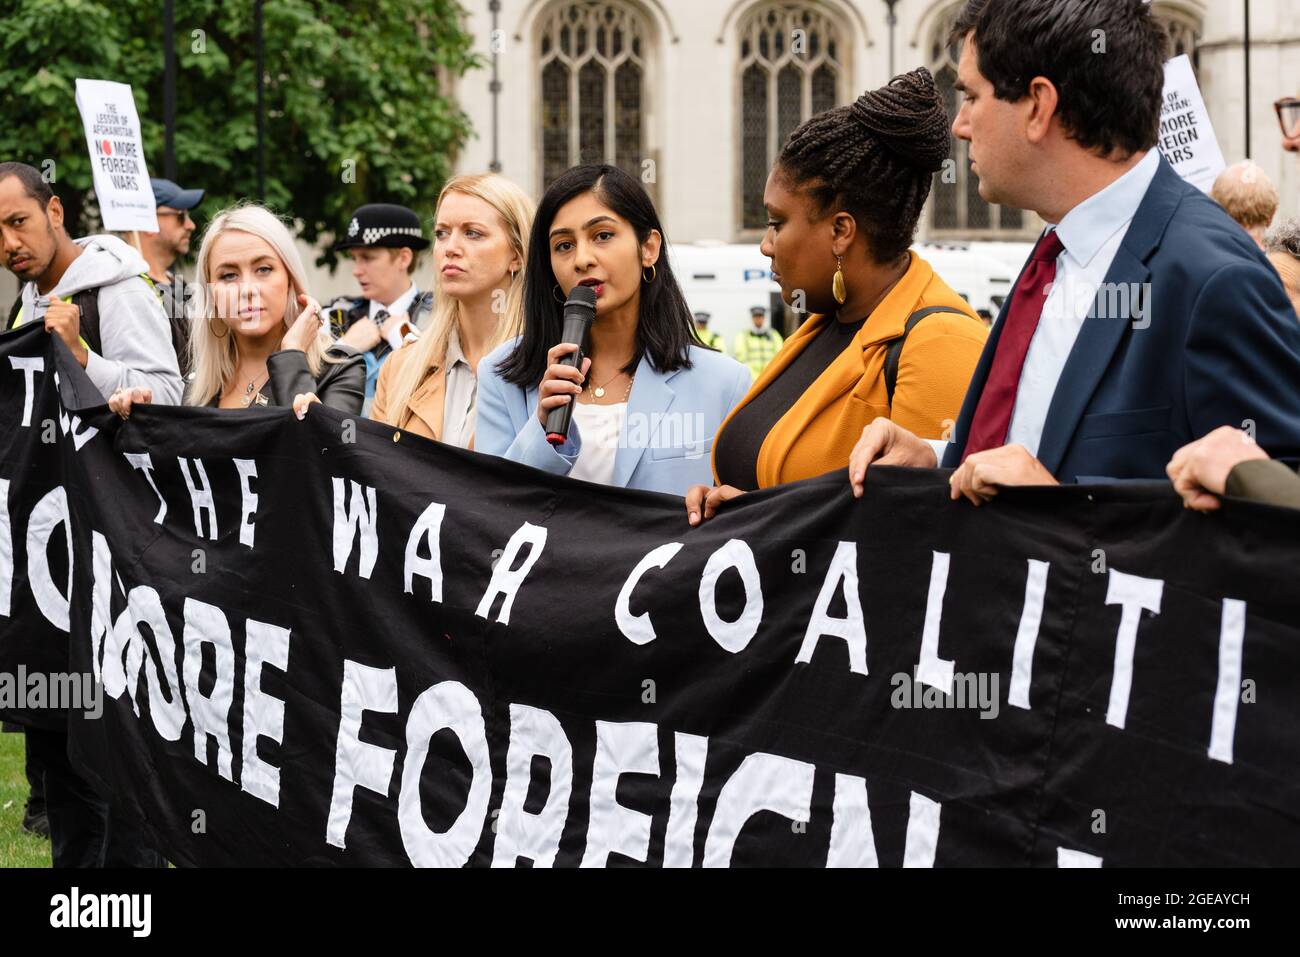 London, UK. 18 August 2021. Stop the war coalition protest outside Parliament against current developments in Afghanistan and government inaction. Stock Photo